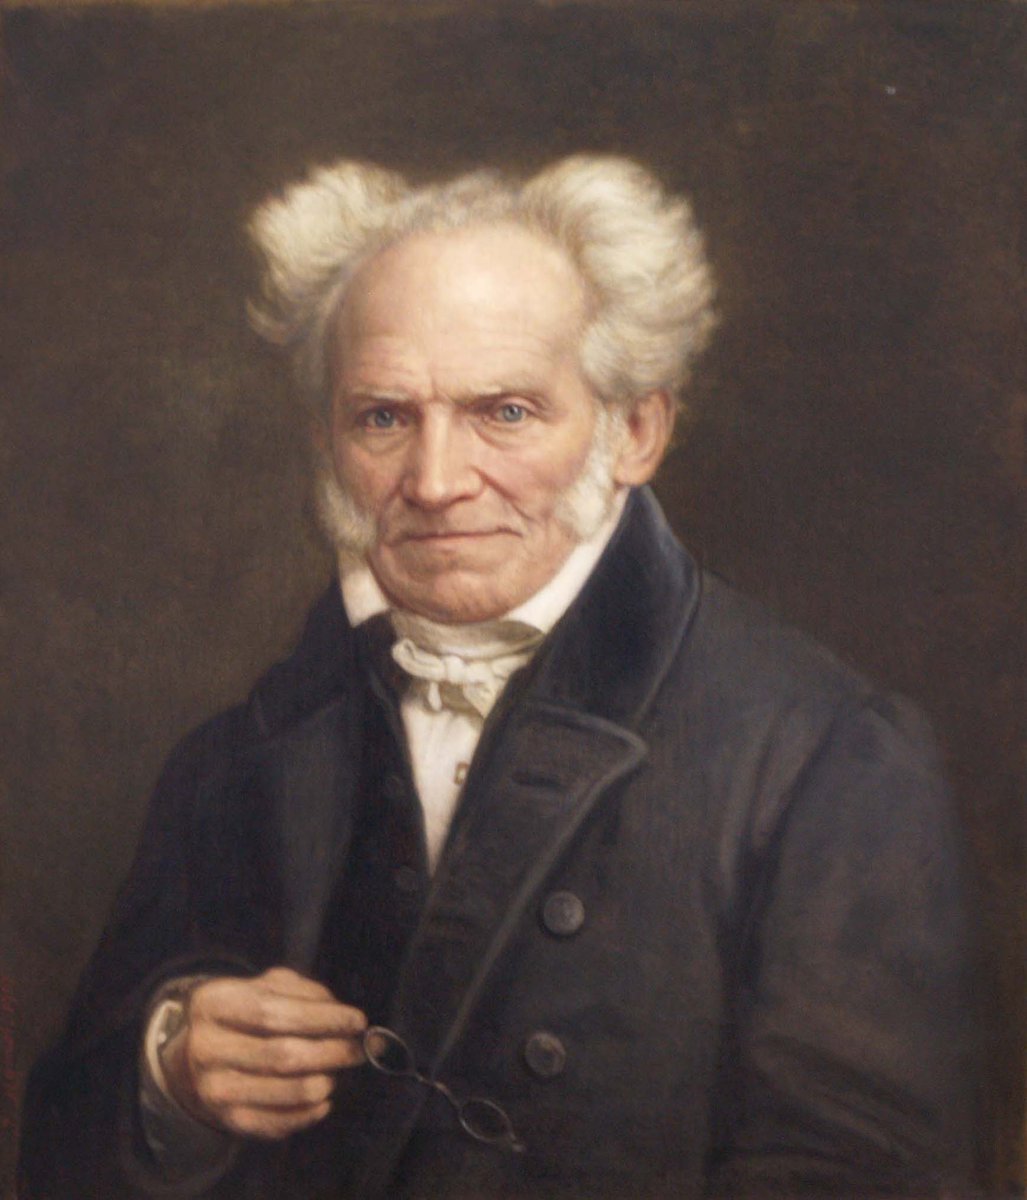 RT @EuropesHistory: 'Buying books would be a good thing, if one could also buy the time to read them' - Arthur Schopenhauer